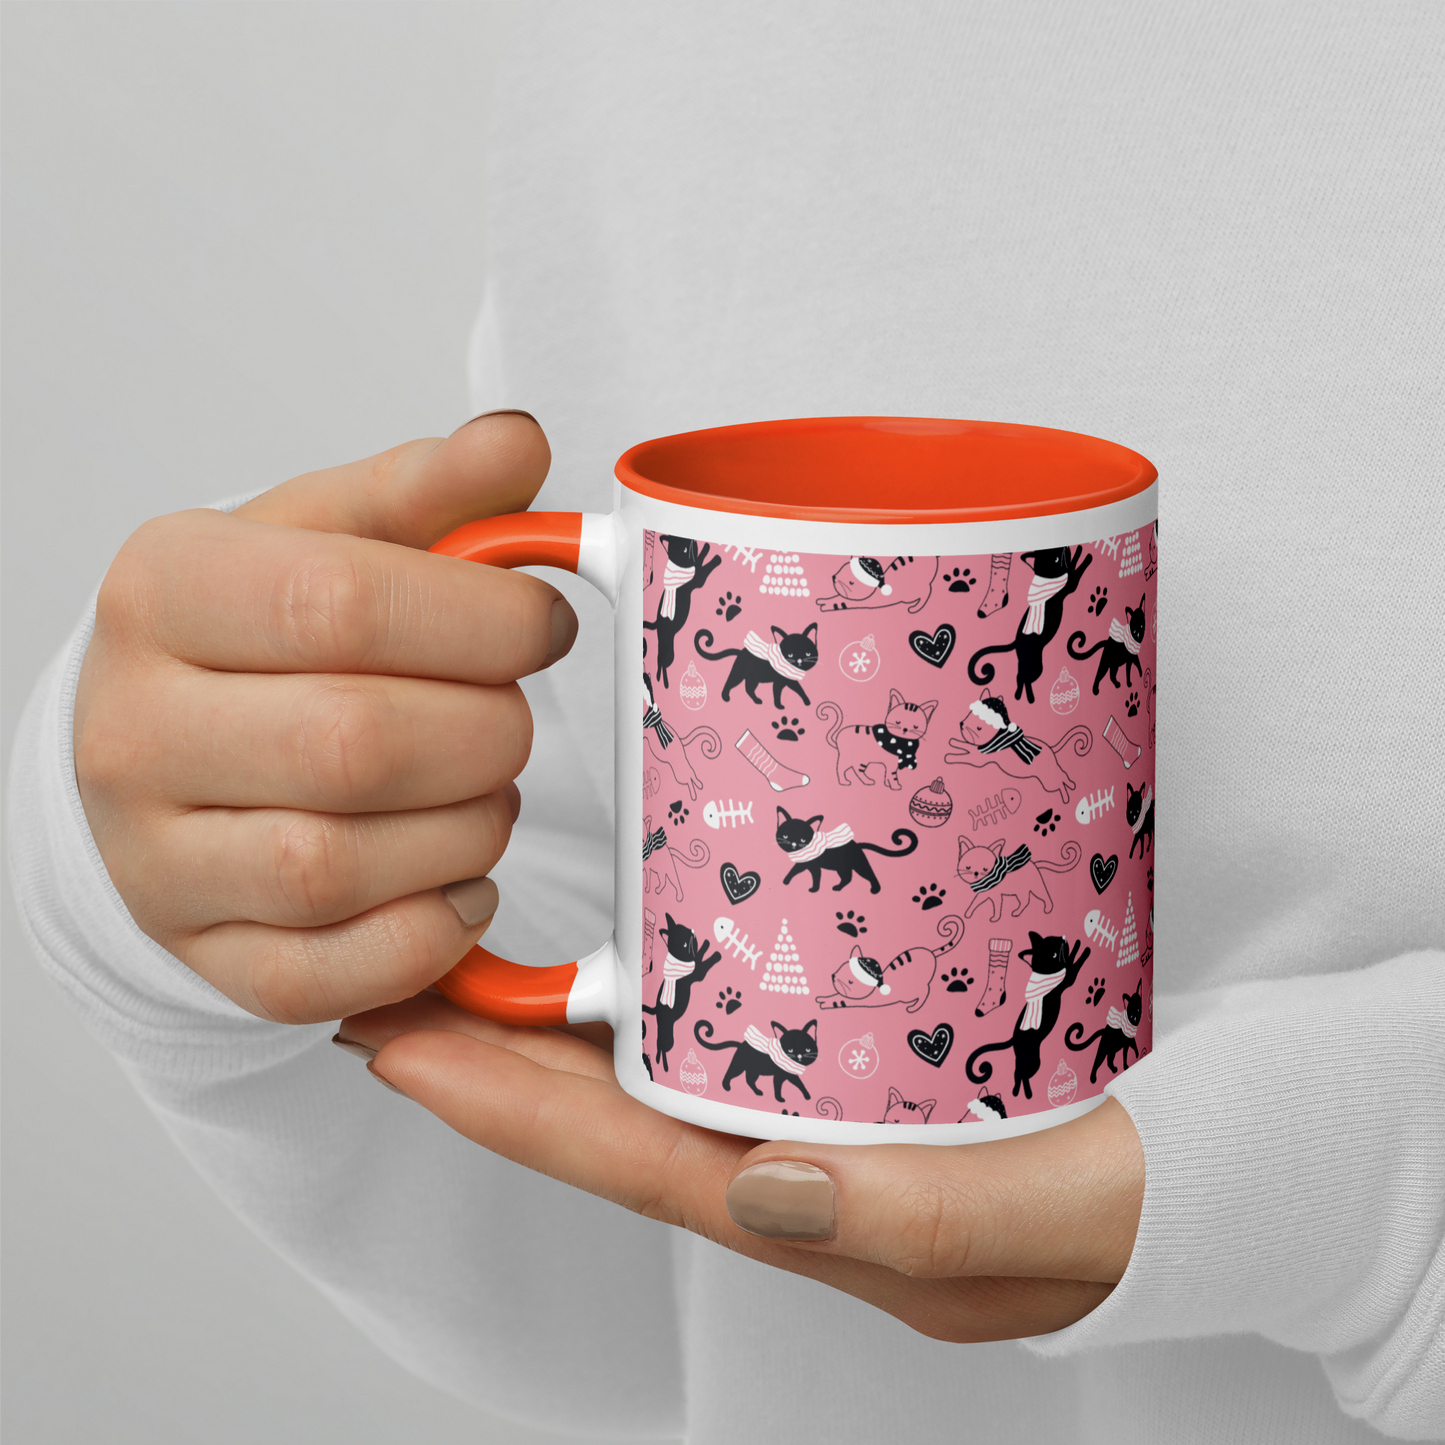 Winter Christmas Cat | Seamless Patterns | White Ceramic Mug with Color Inside - #2